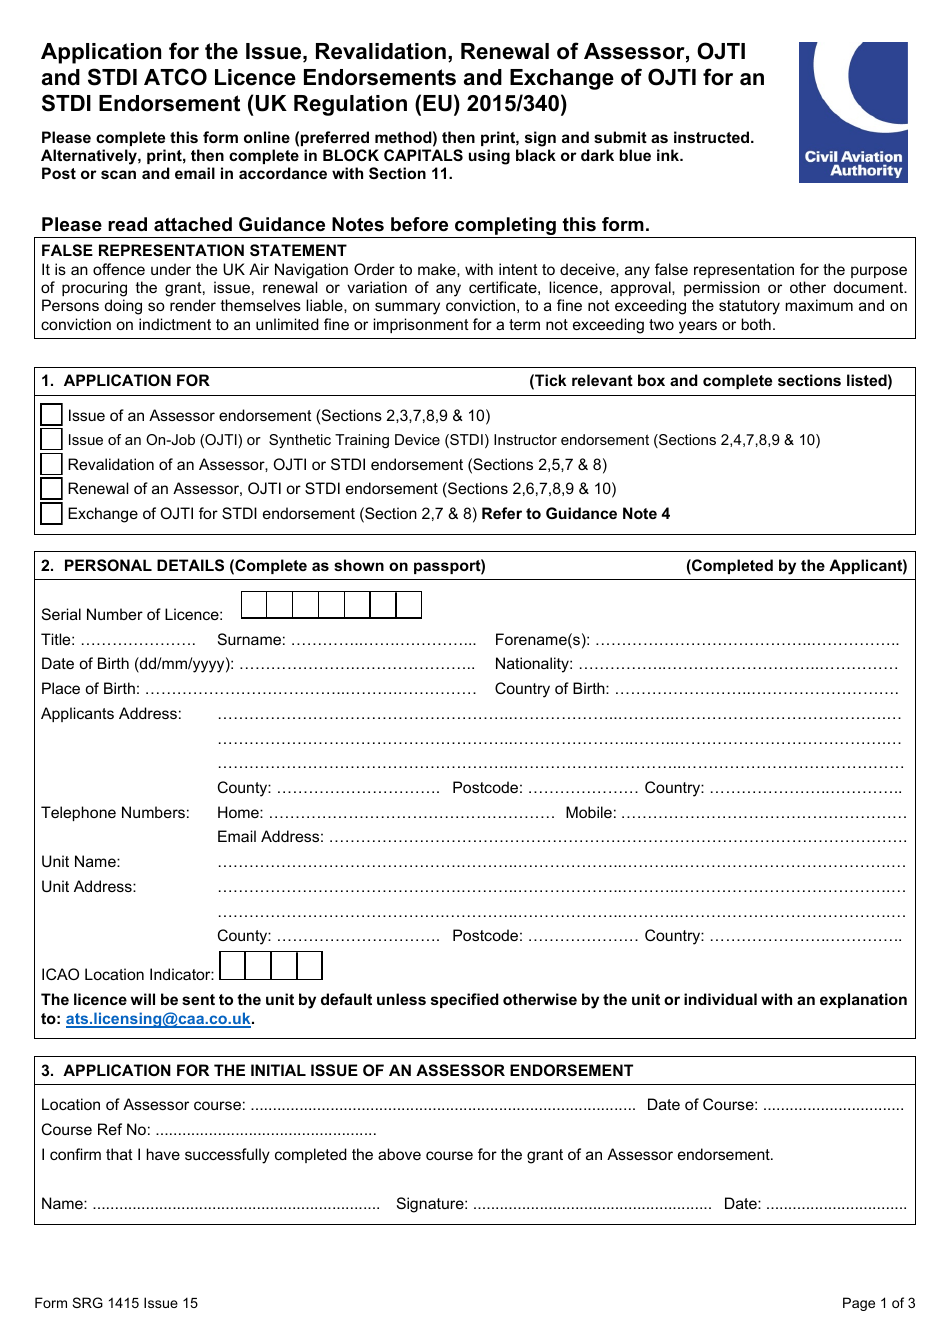 Form SRG1415 Application for the Issue, Revalidation, Renewal of Assessor, Ojti and Stdi Atco Licence Endorsements and Exchange of Ojti for an Stdi Endorsement (UK Regulation (Eu) 2015 / 340) - United Kingdom, Page 1